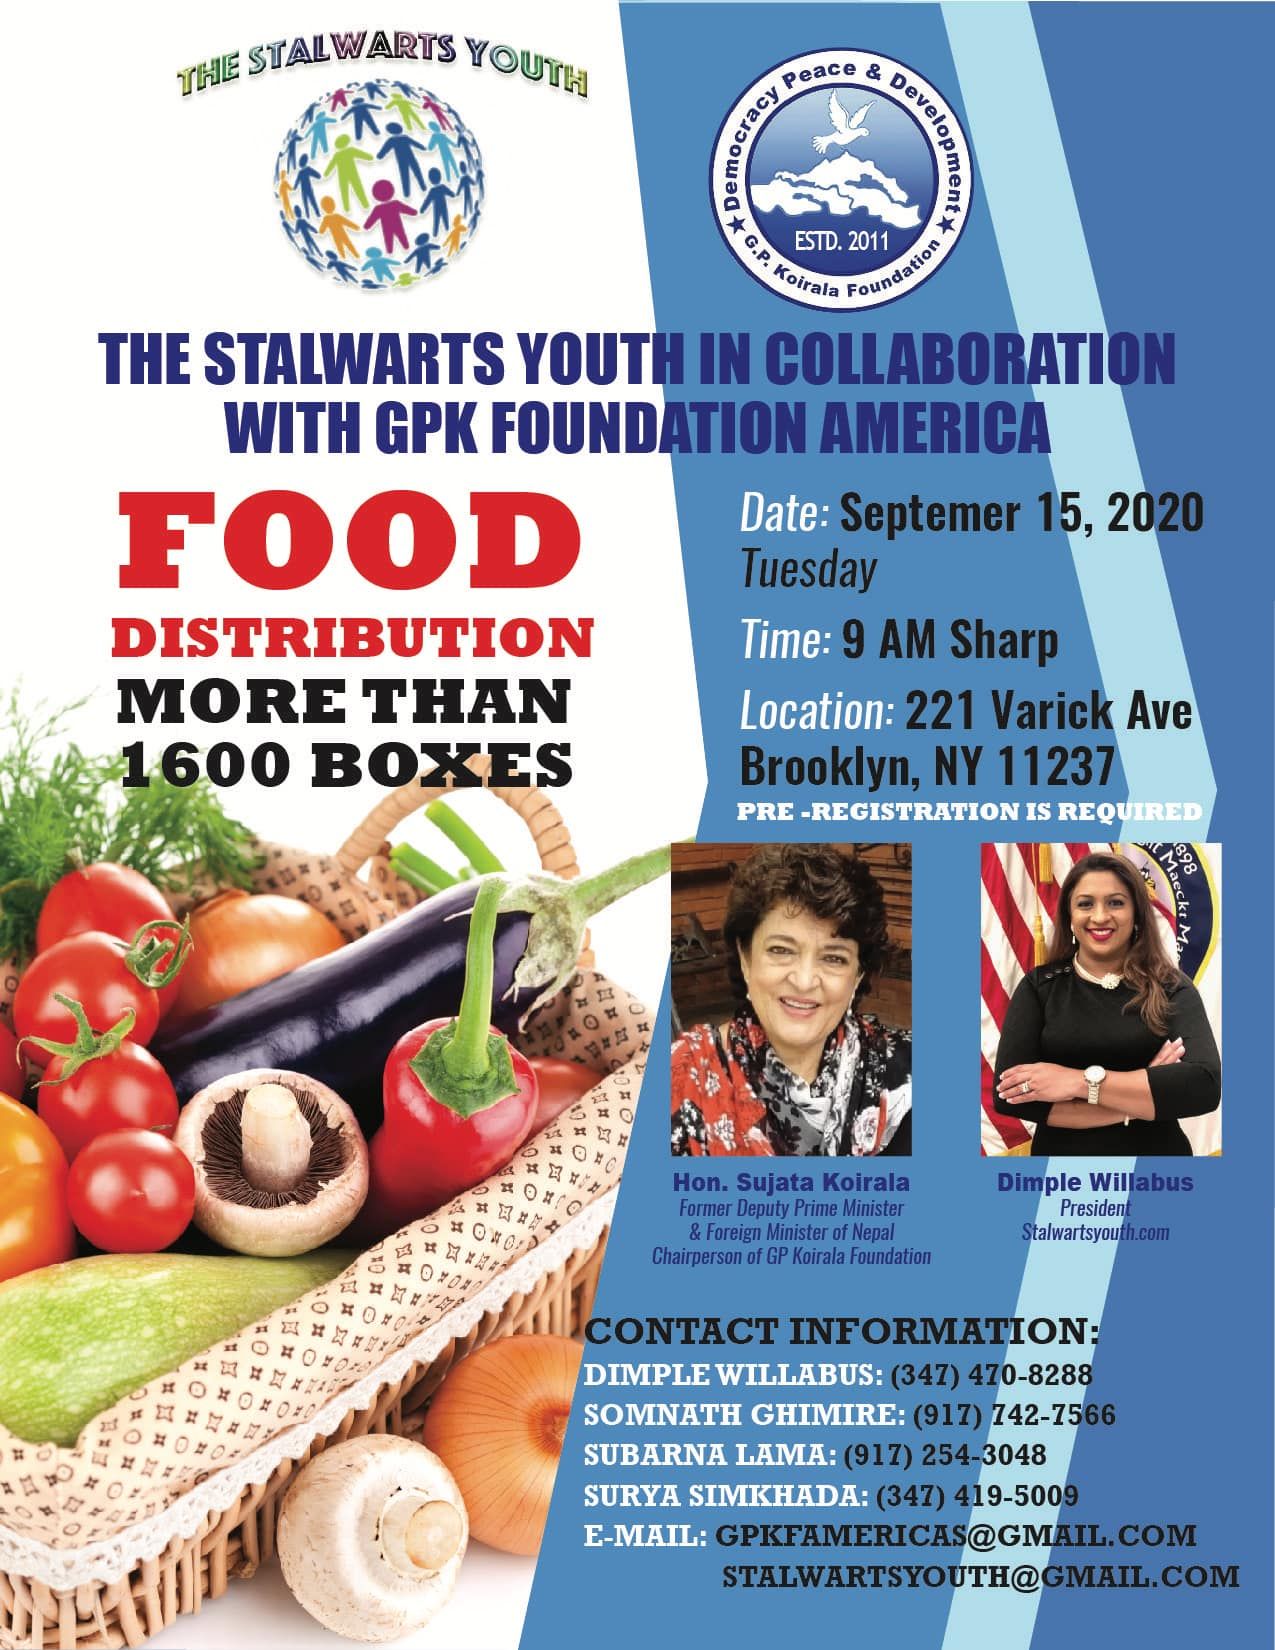 Stalwarts Youth Food Distribution in collaboration with GPK Foundation in Brooklyn, NY on September 15, 2020